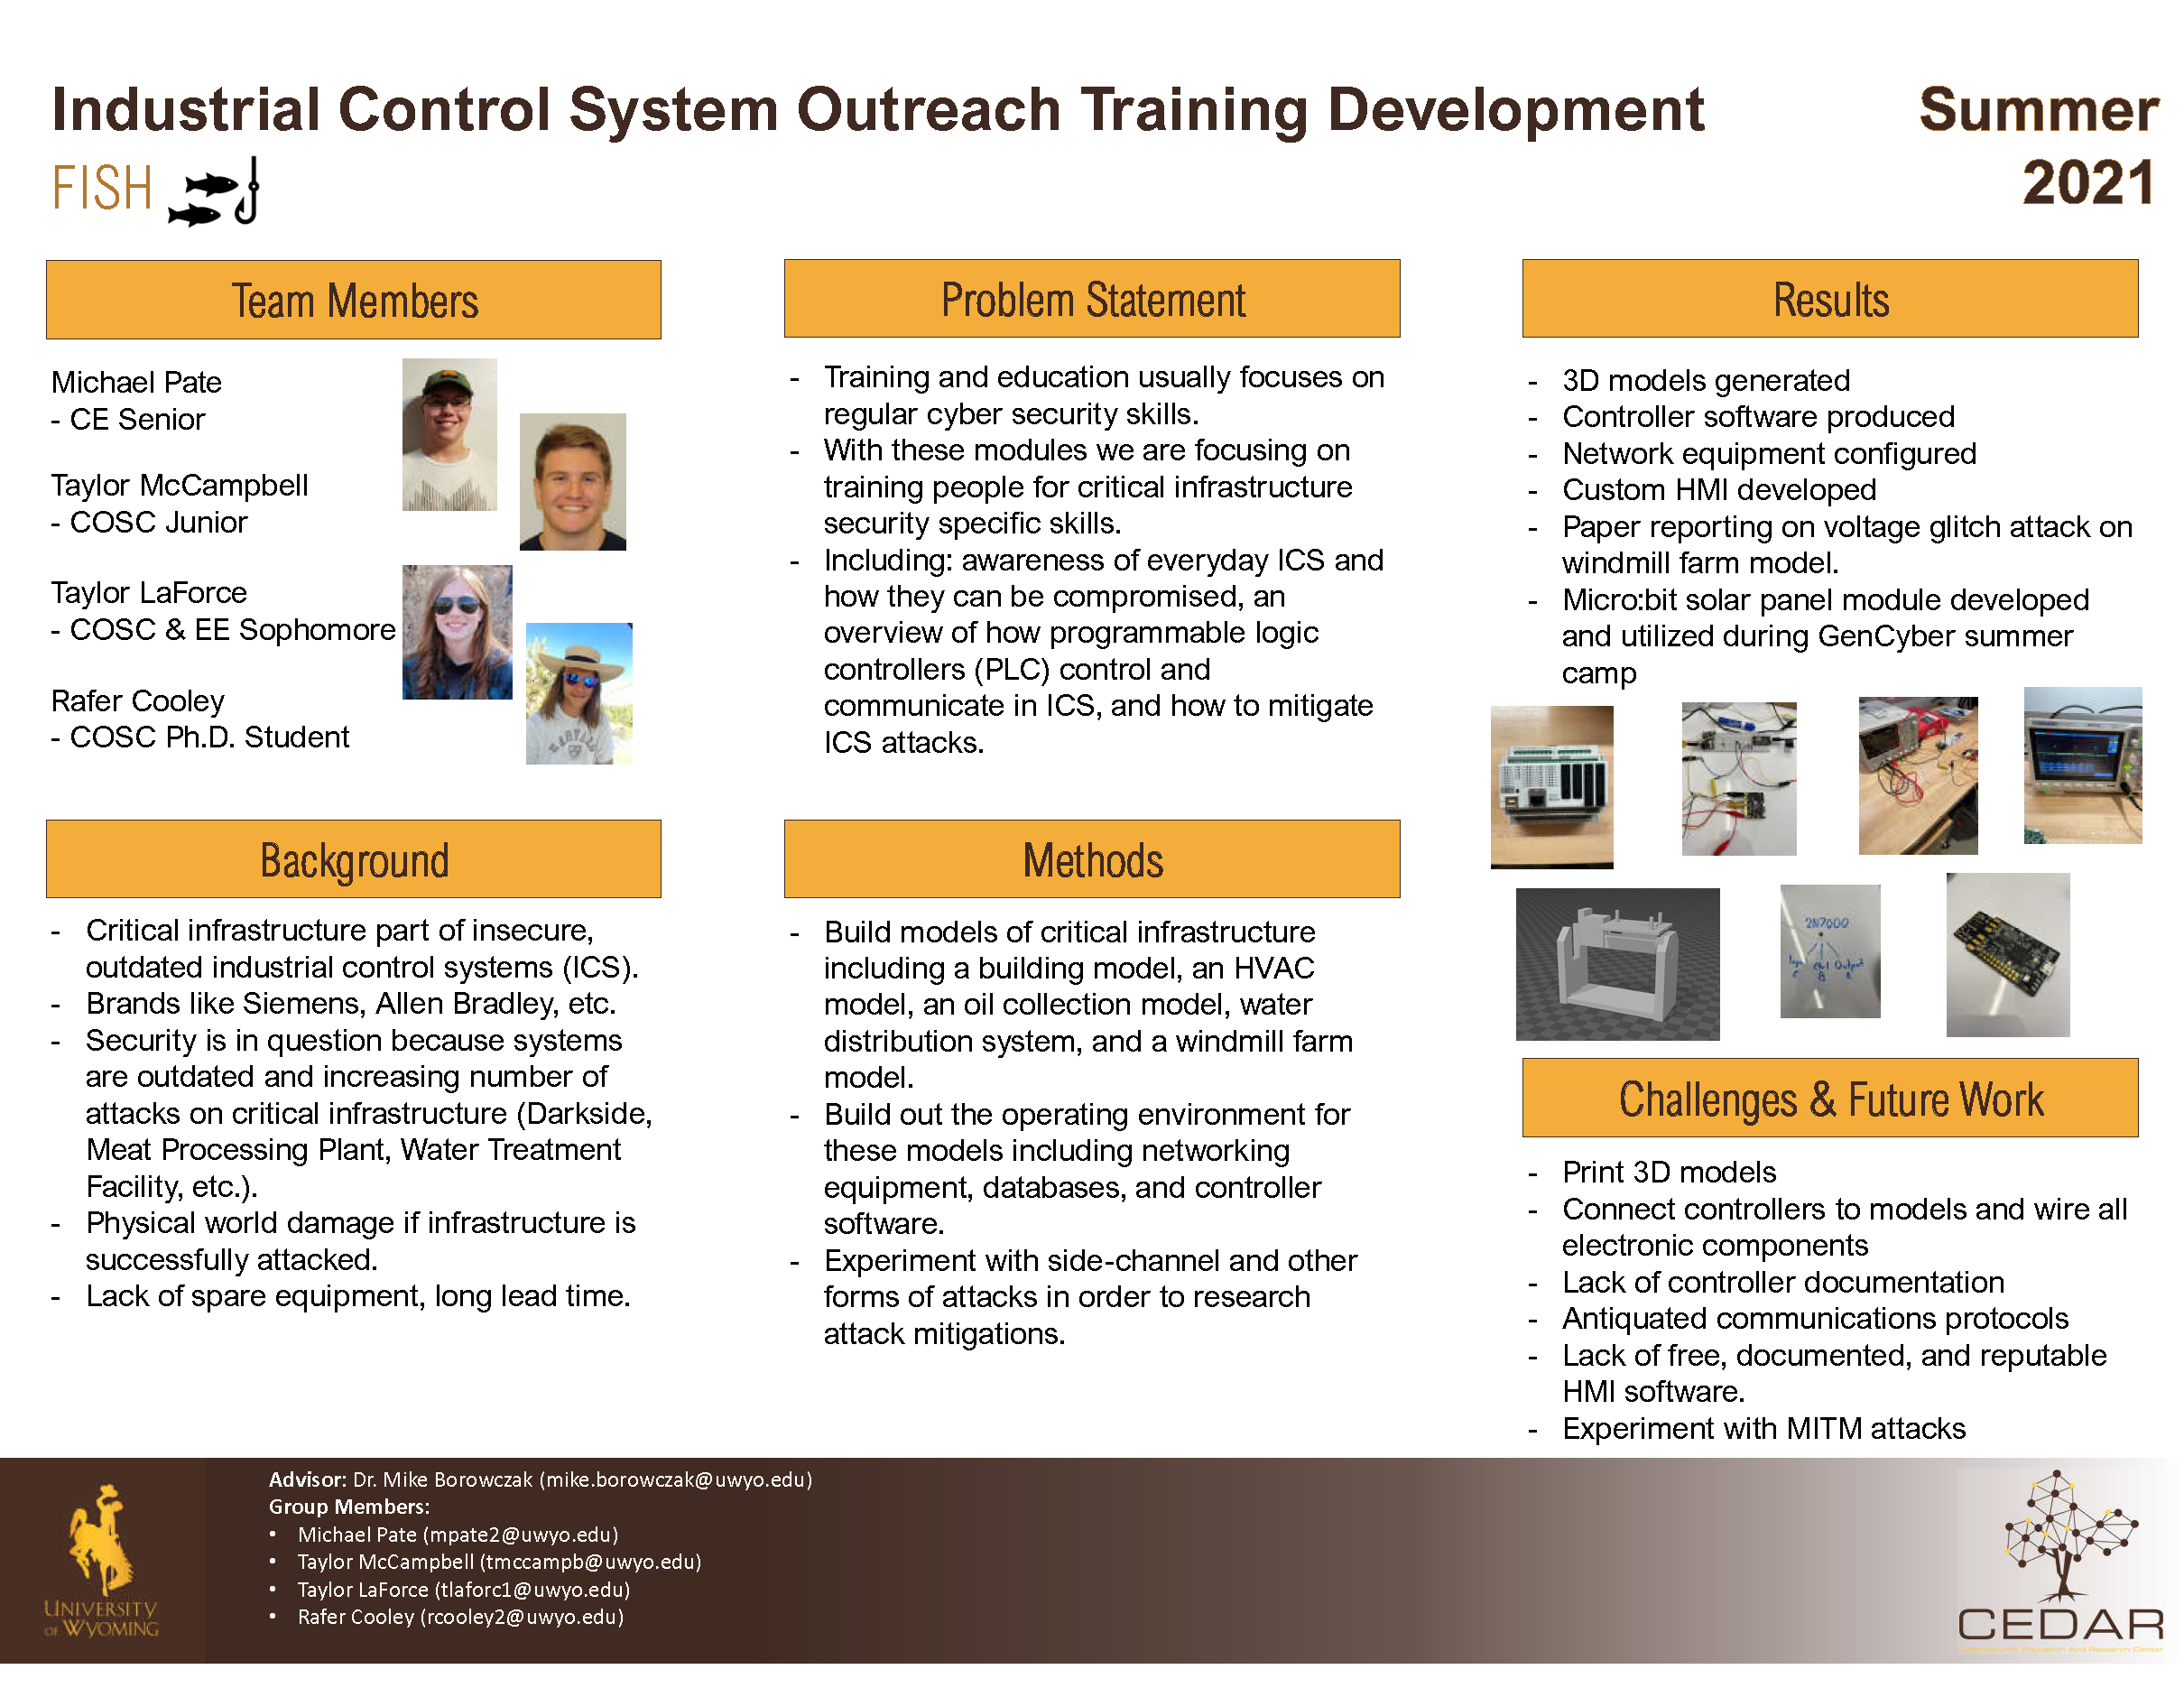  Poster for Industrial Control System Outreach Training Development